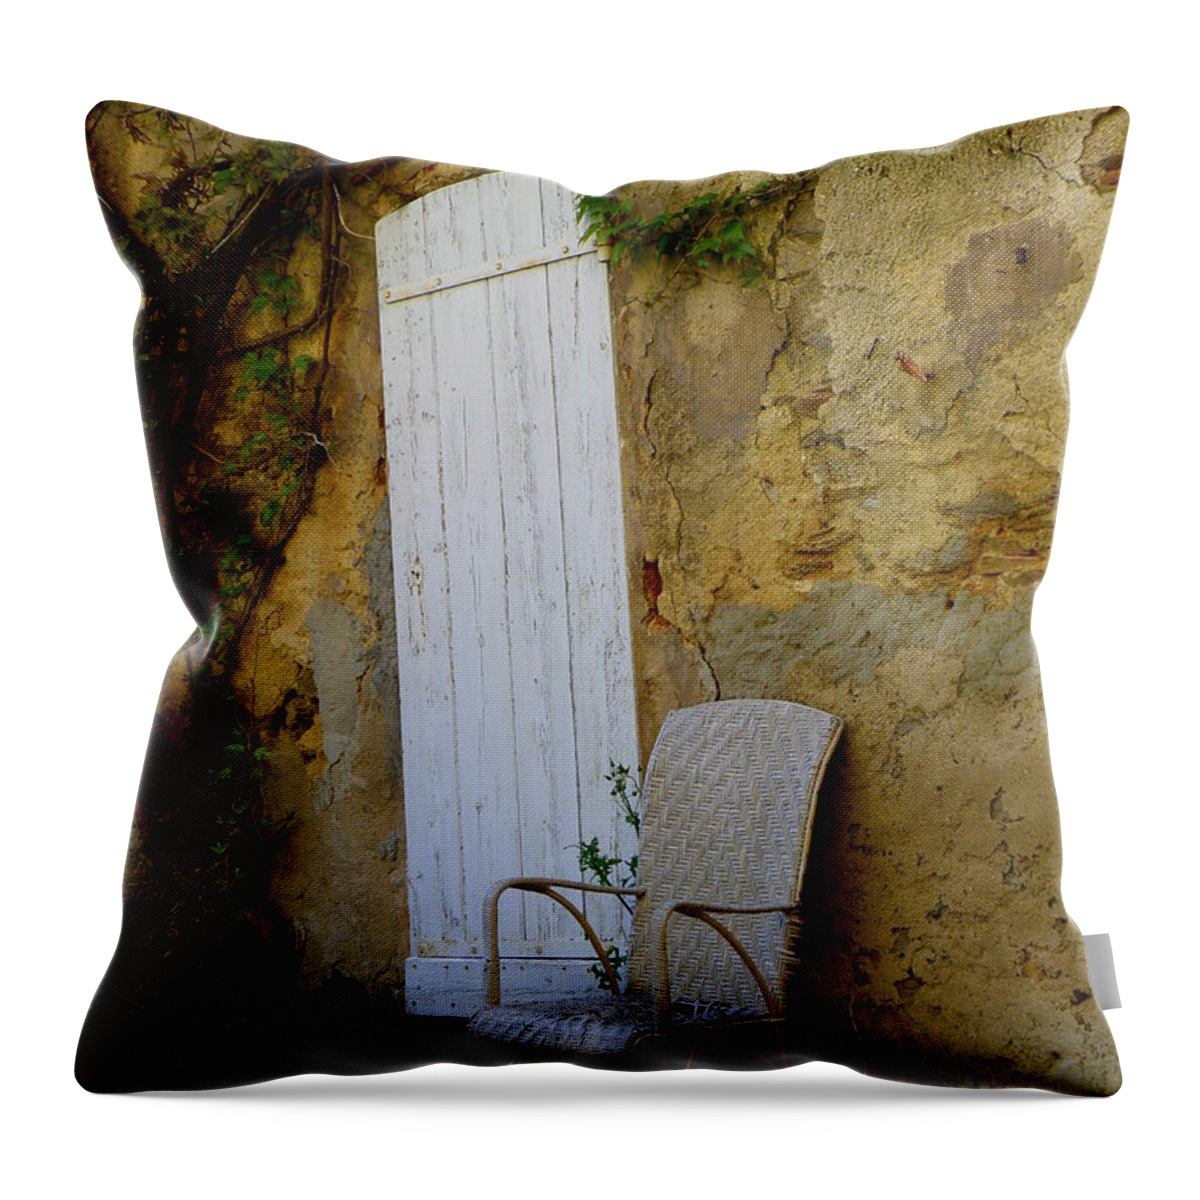 Door Throw Pillow featuring the photograph Chair by the White Door by Lainie Wrightson